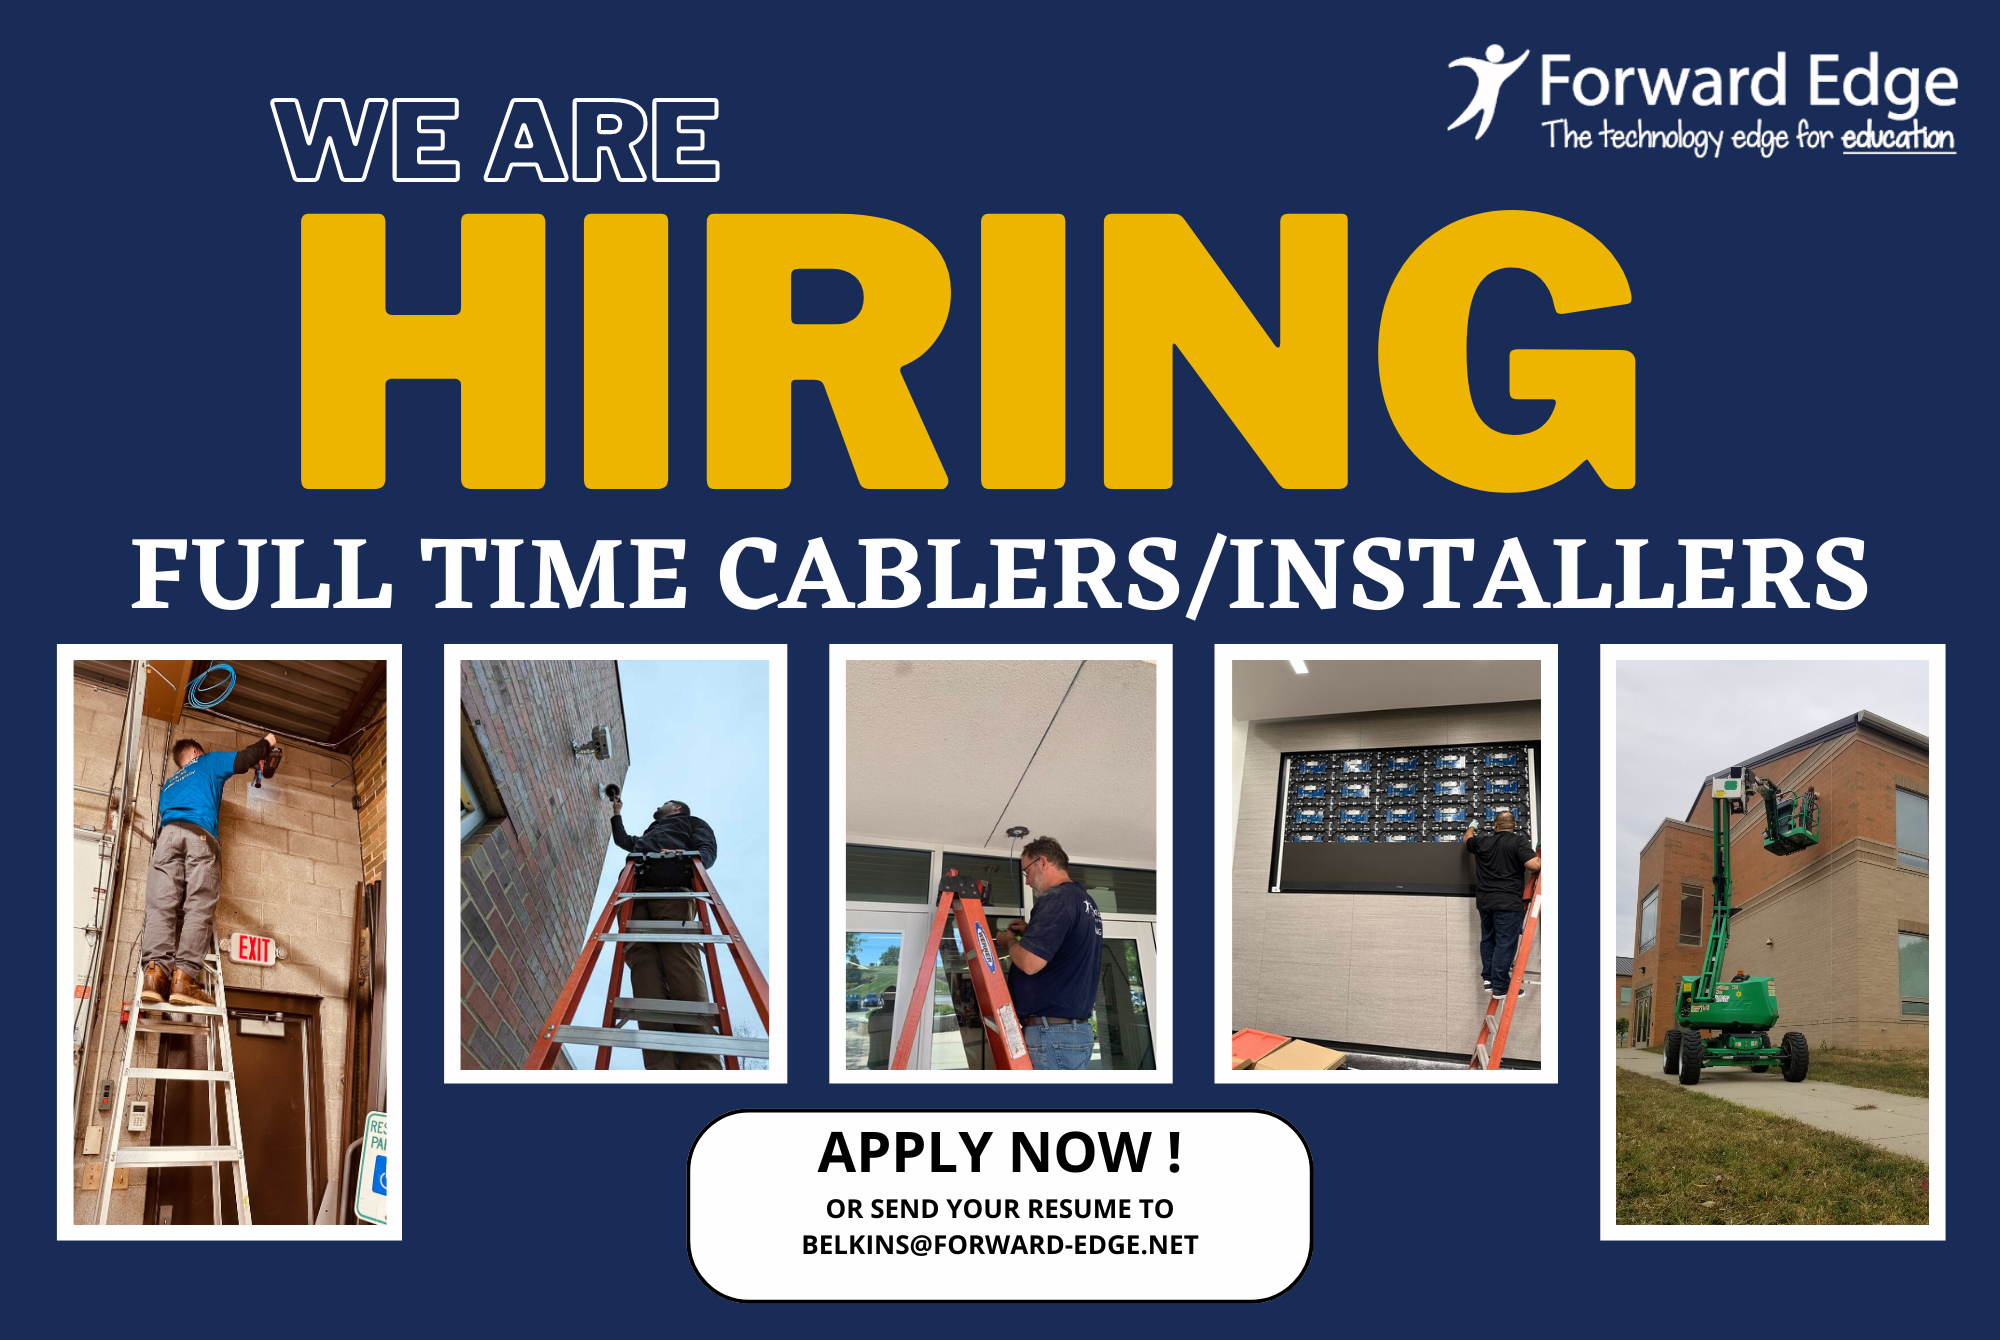 Forward Edge is Hiring Cablers!